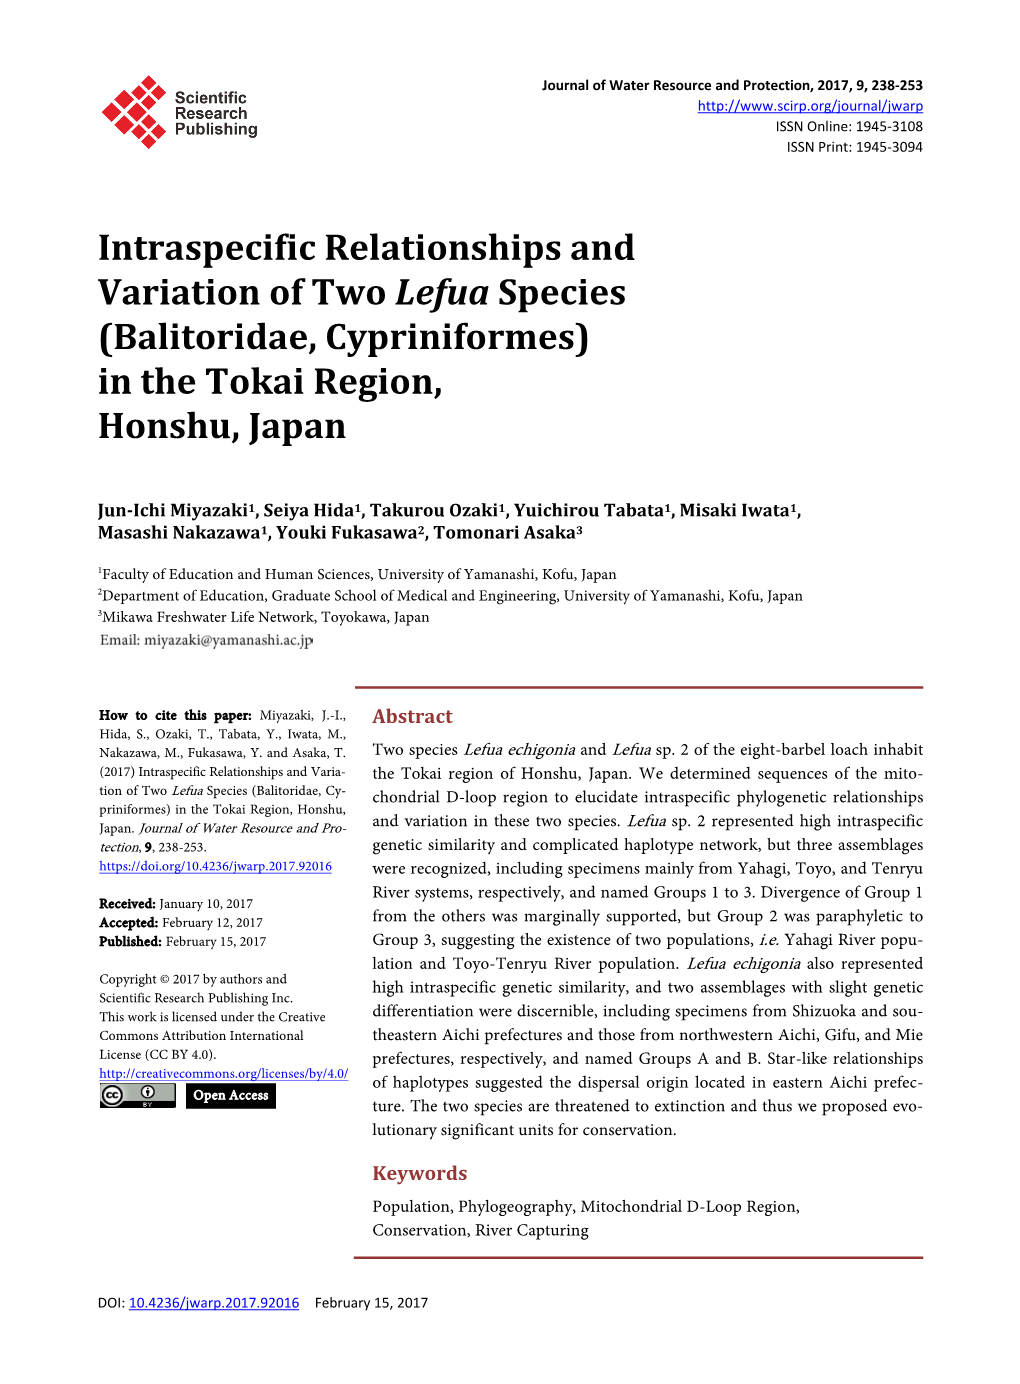 Intraspecific Relationships and Variation of Two Lefua Species (Balitoridae, Cypriniformes) in the Tokai Region, Honshu, Japan